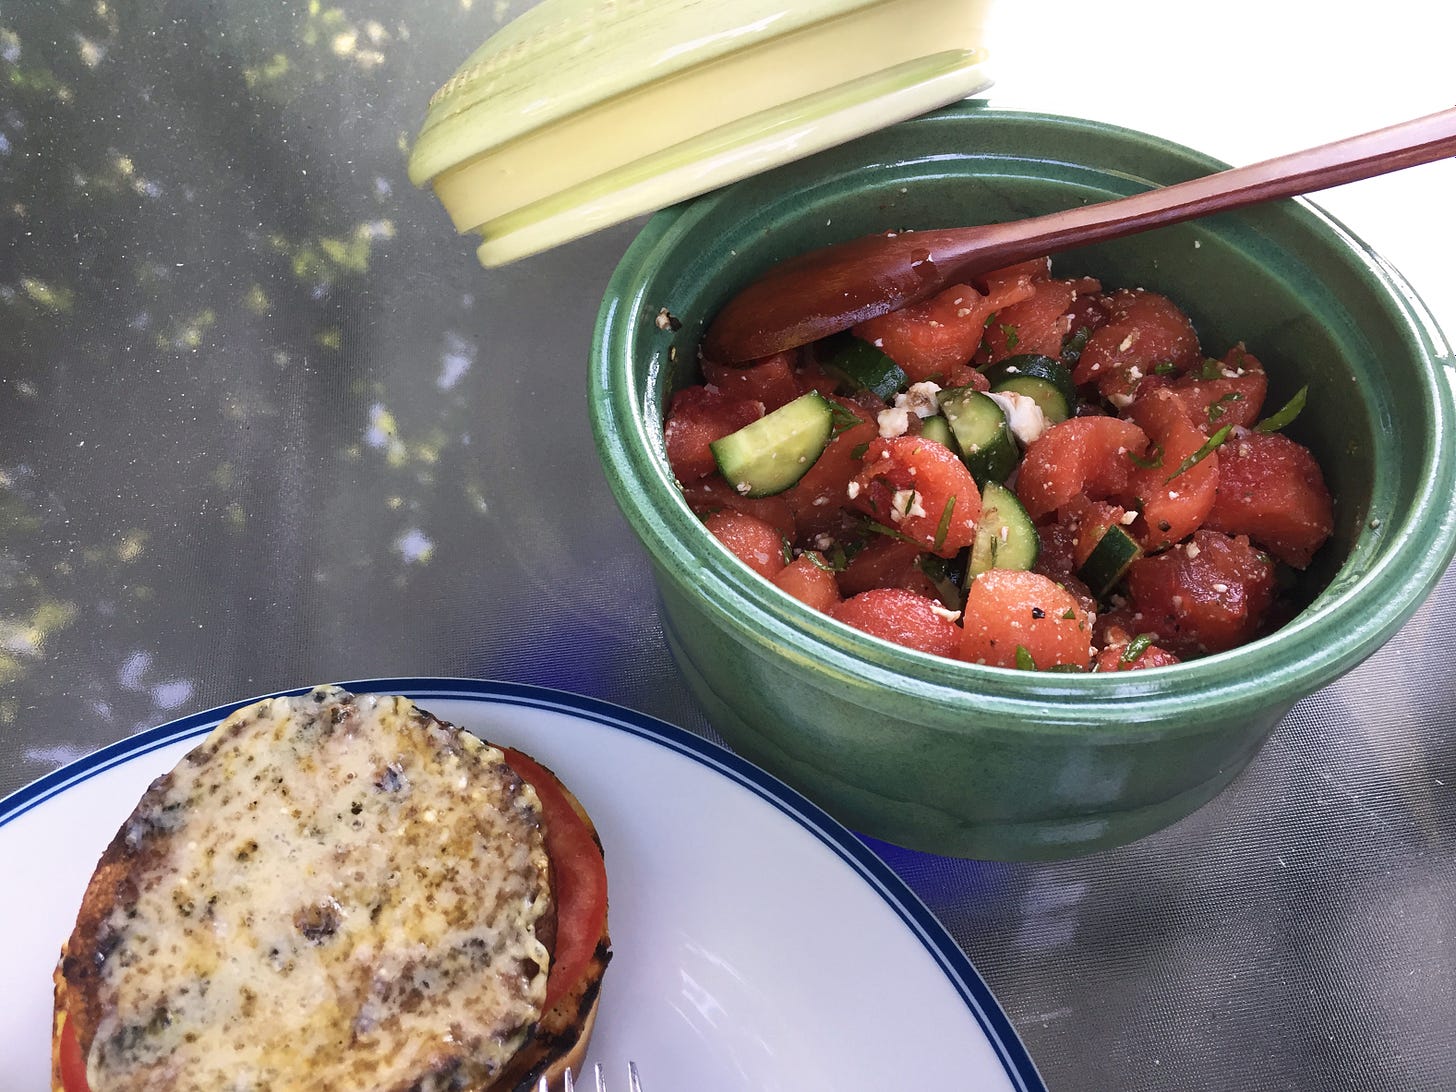 a green bowl of watermelon and cucumber salad with herbs and feta. A wooden spoon sits in the bowl and the bowl's lid rests on its edge. In the bottom corner, an open-faced cheeseburger is just visible.